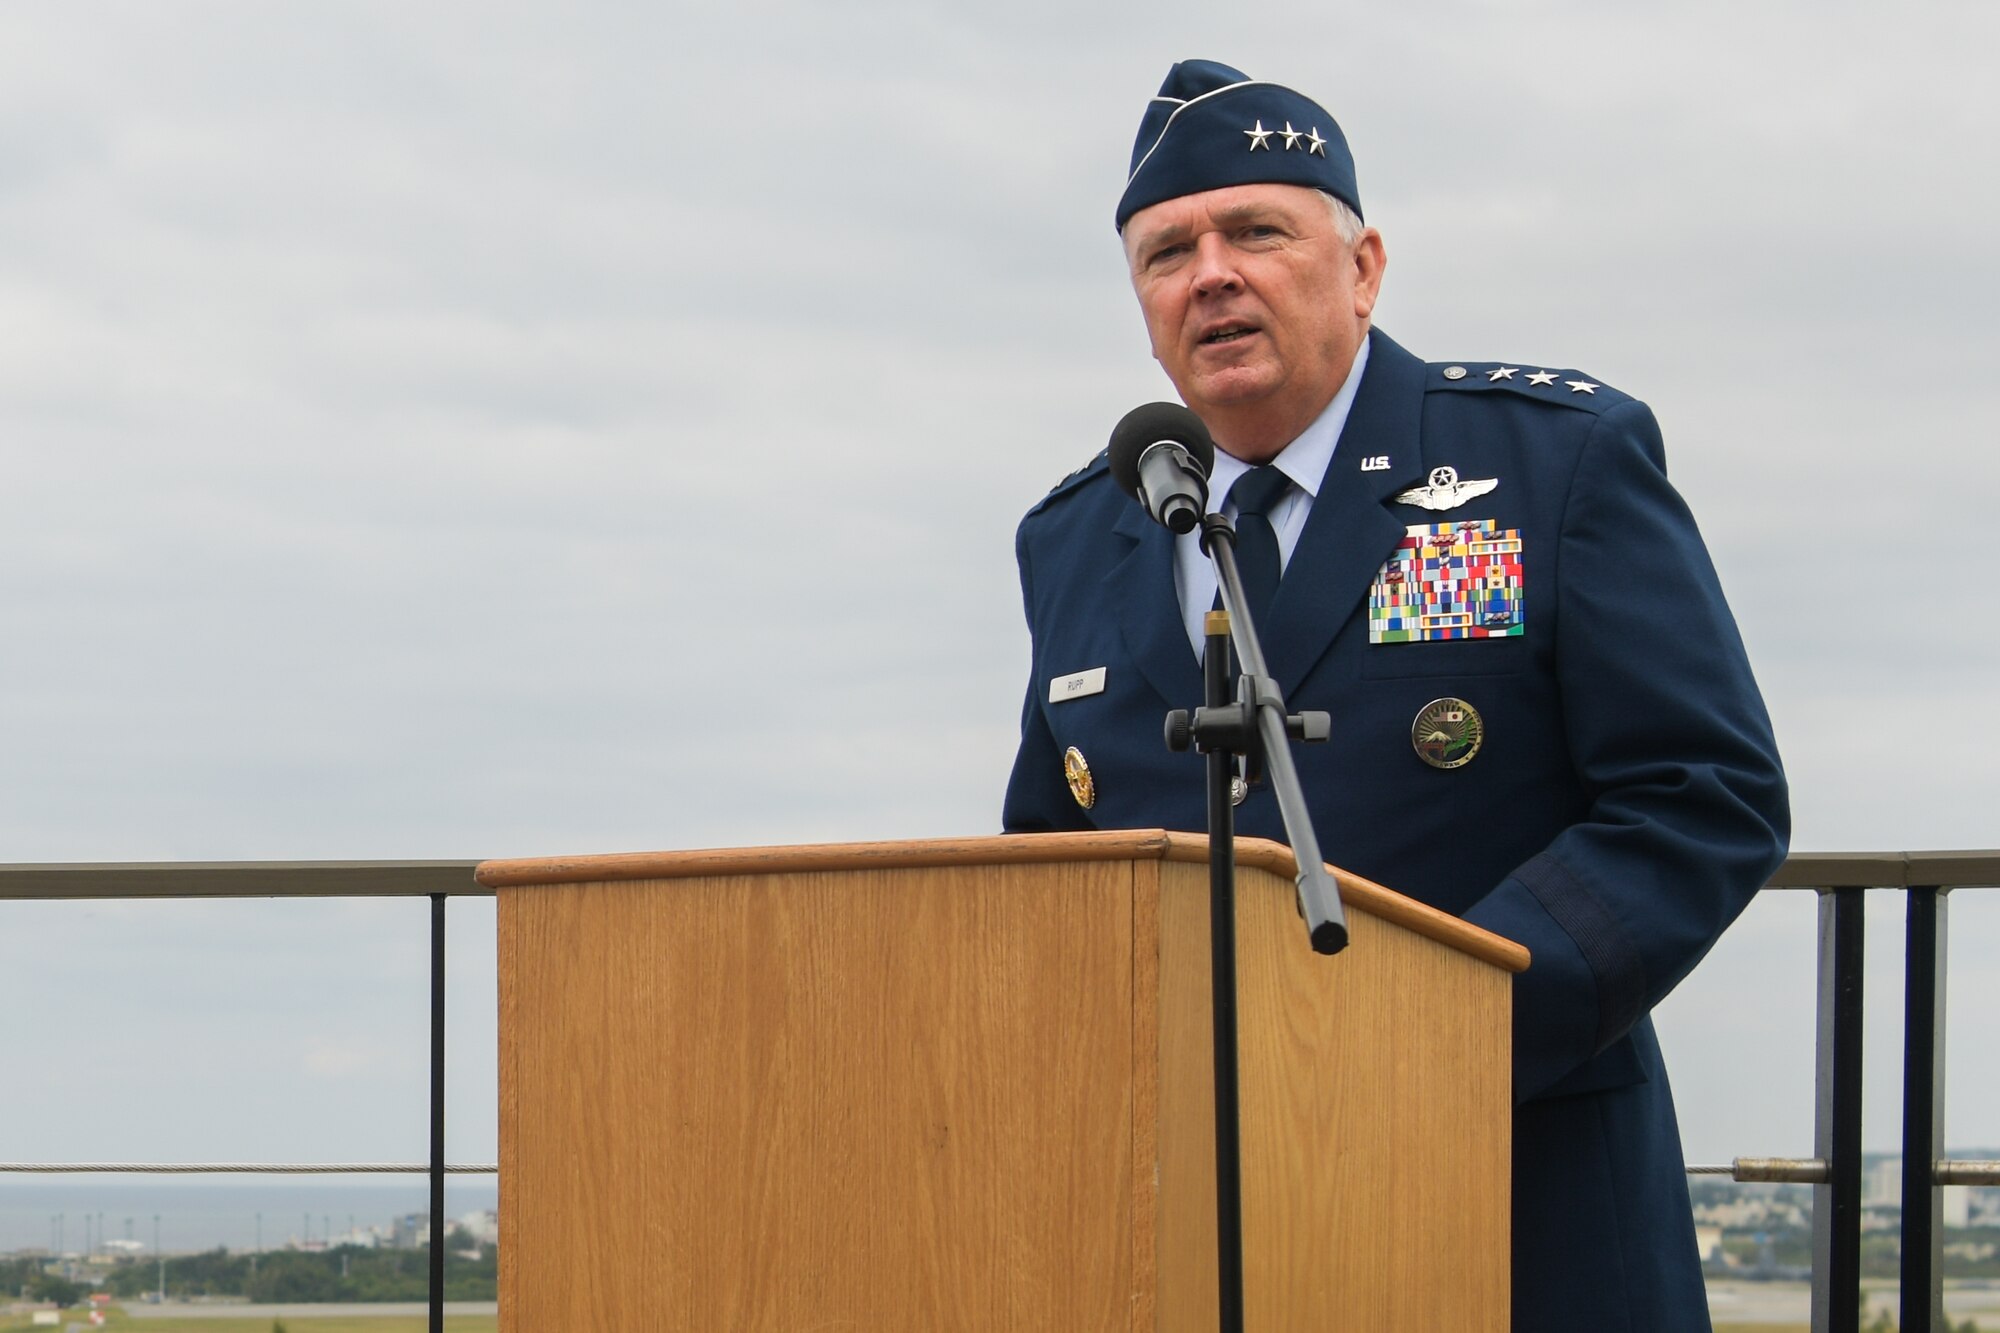 U.S. Air Force Lt. Gen. Ricky Rupp, U.S. Forces Japan and Fifth Air Force commander, speaks during the promotion ceremony for U.S. Air Force Brig. Gen. Nicholas Evans, 18th Wing commander.